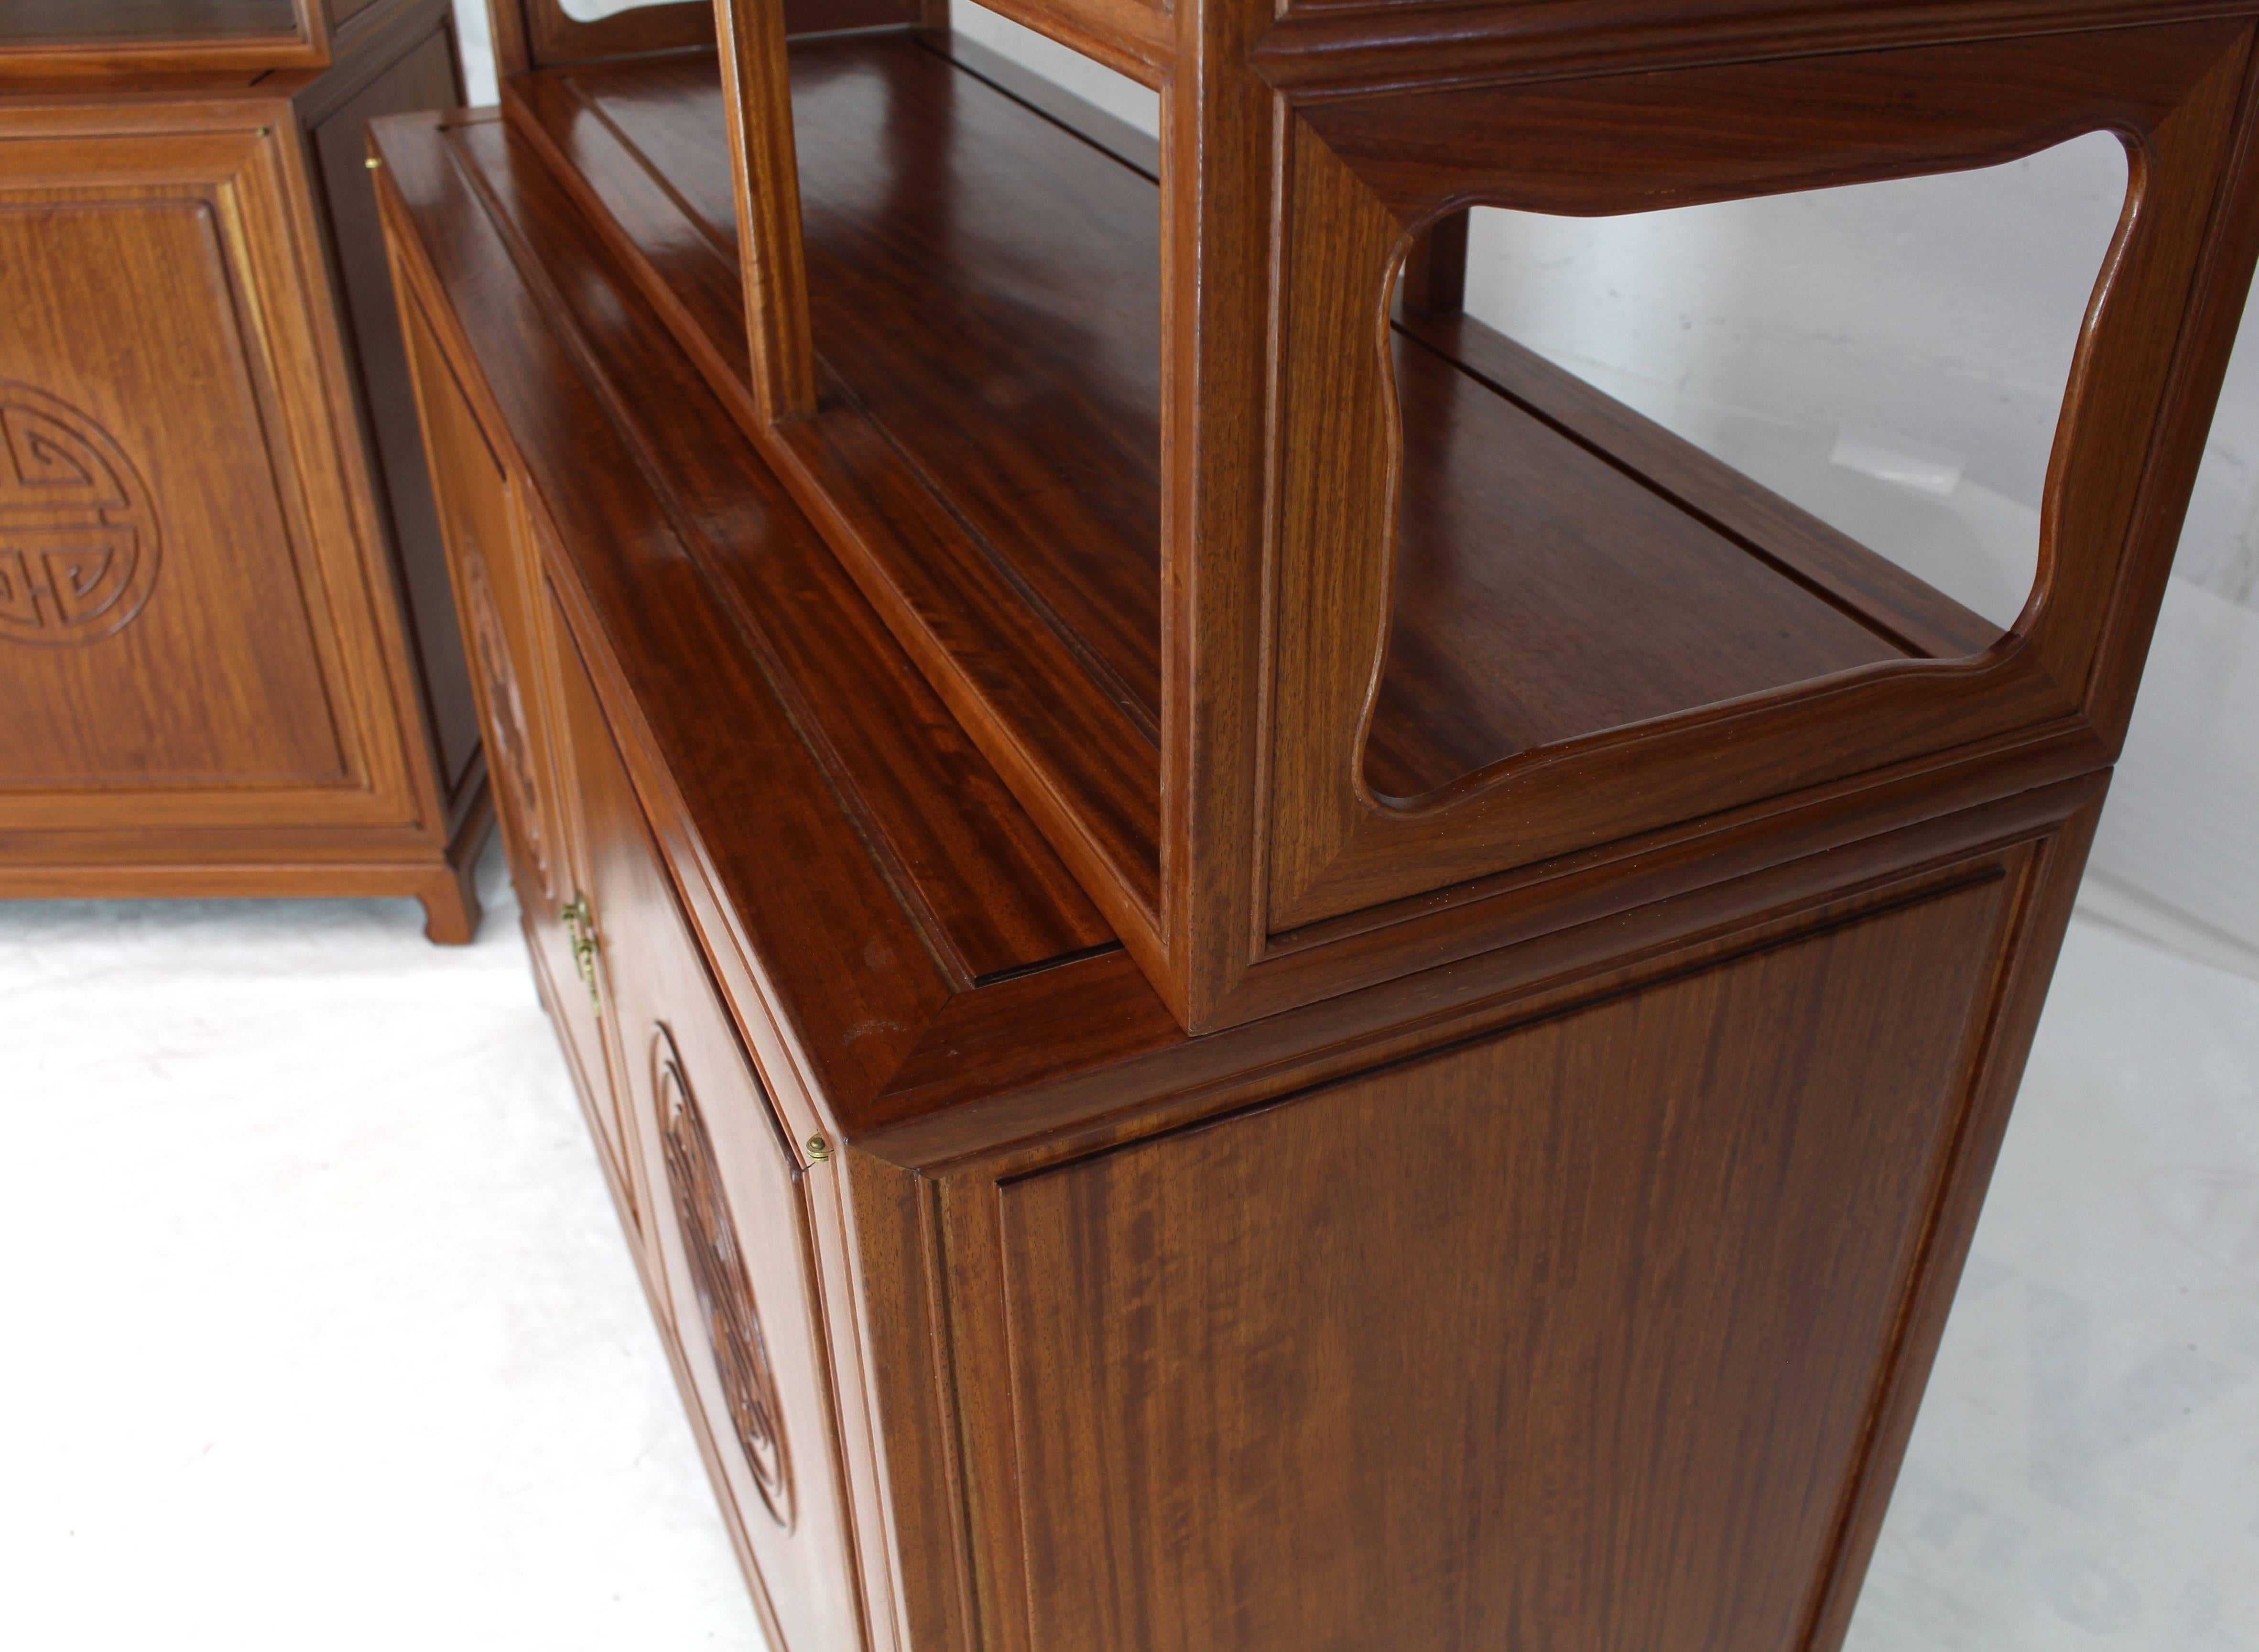 Pair of decorative solid teak carved étagères bookcases shelves with bottom cabinets. Asian inspired. Solid brass pulls.